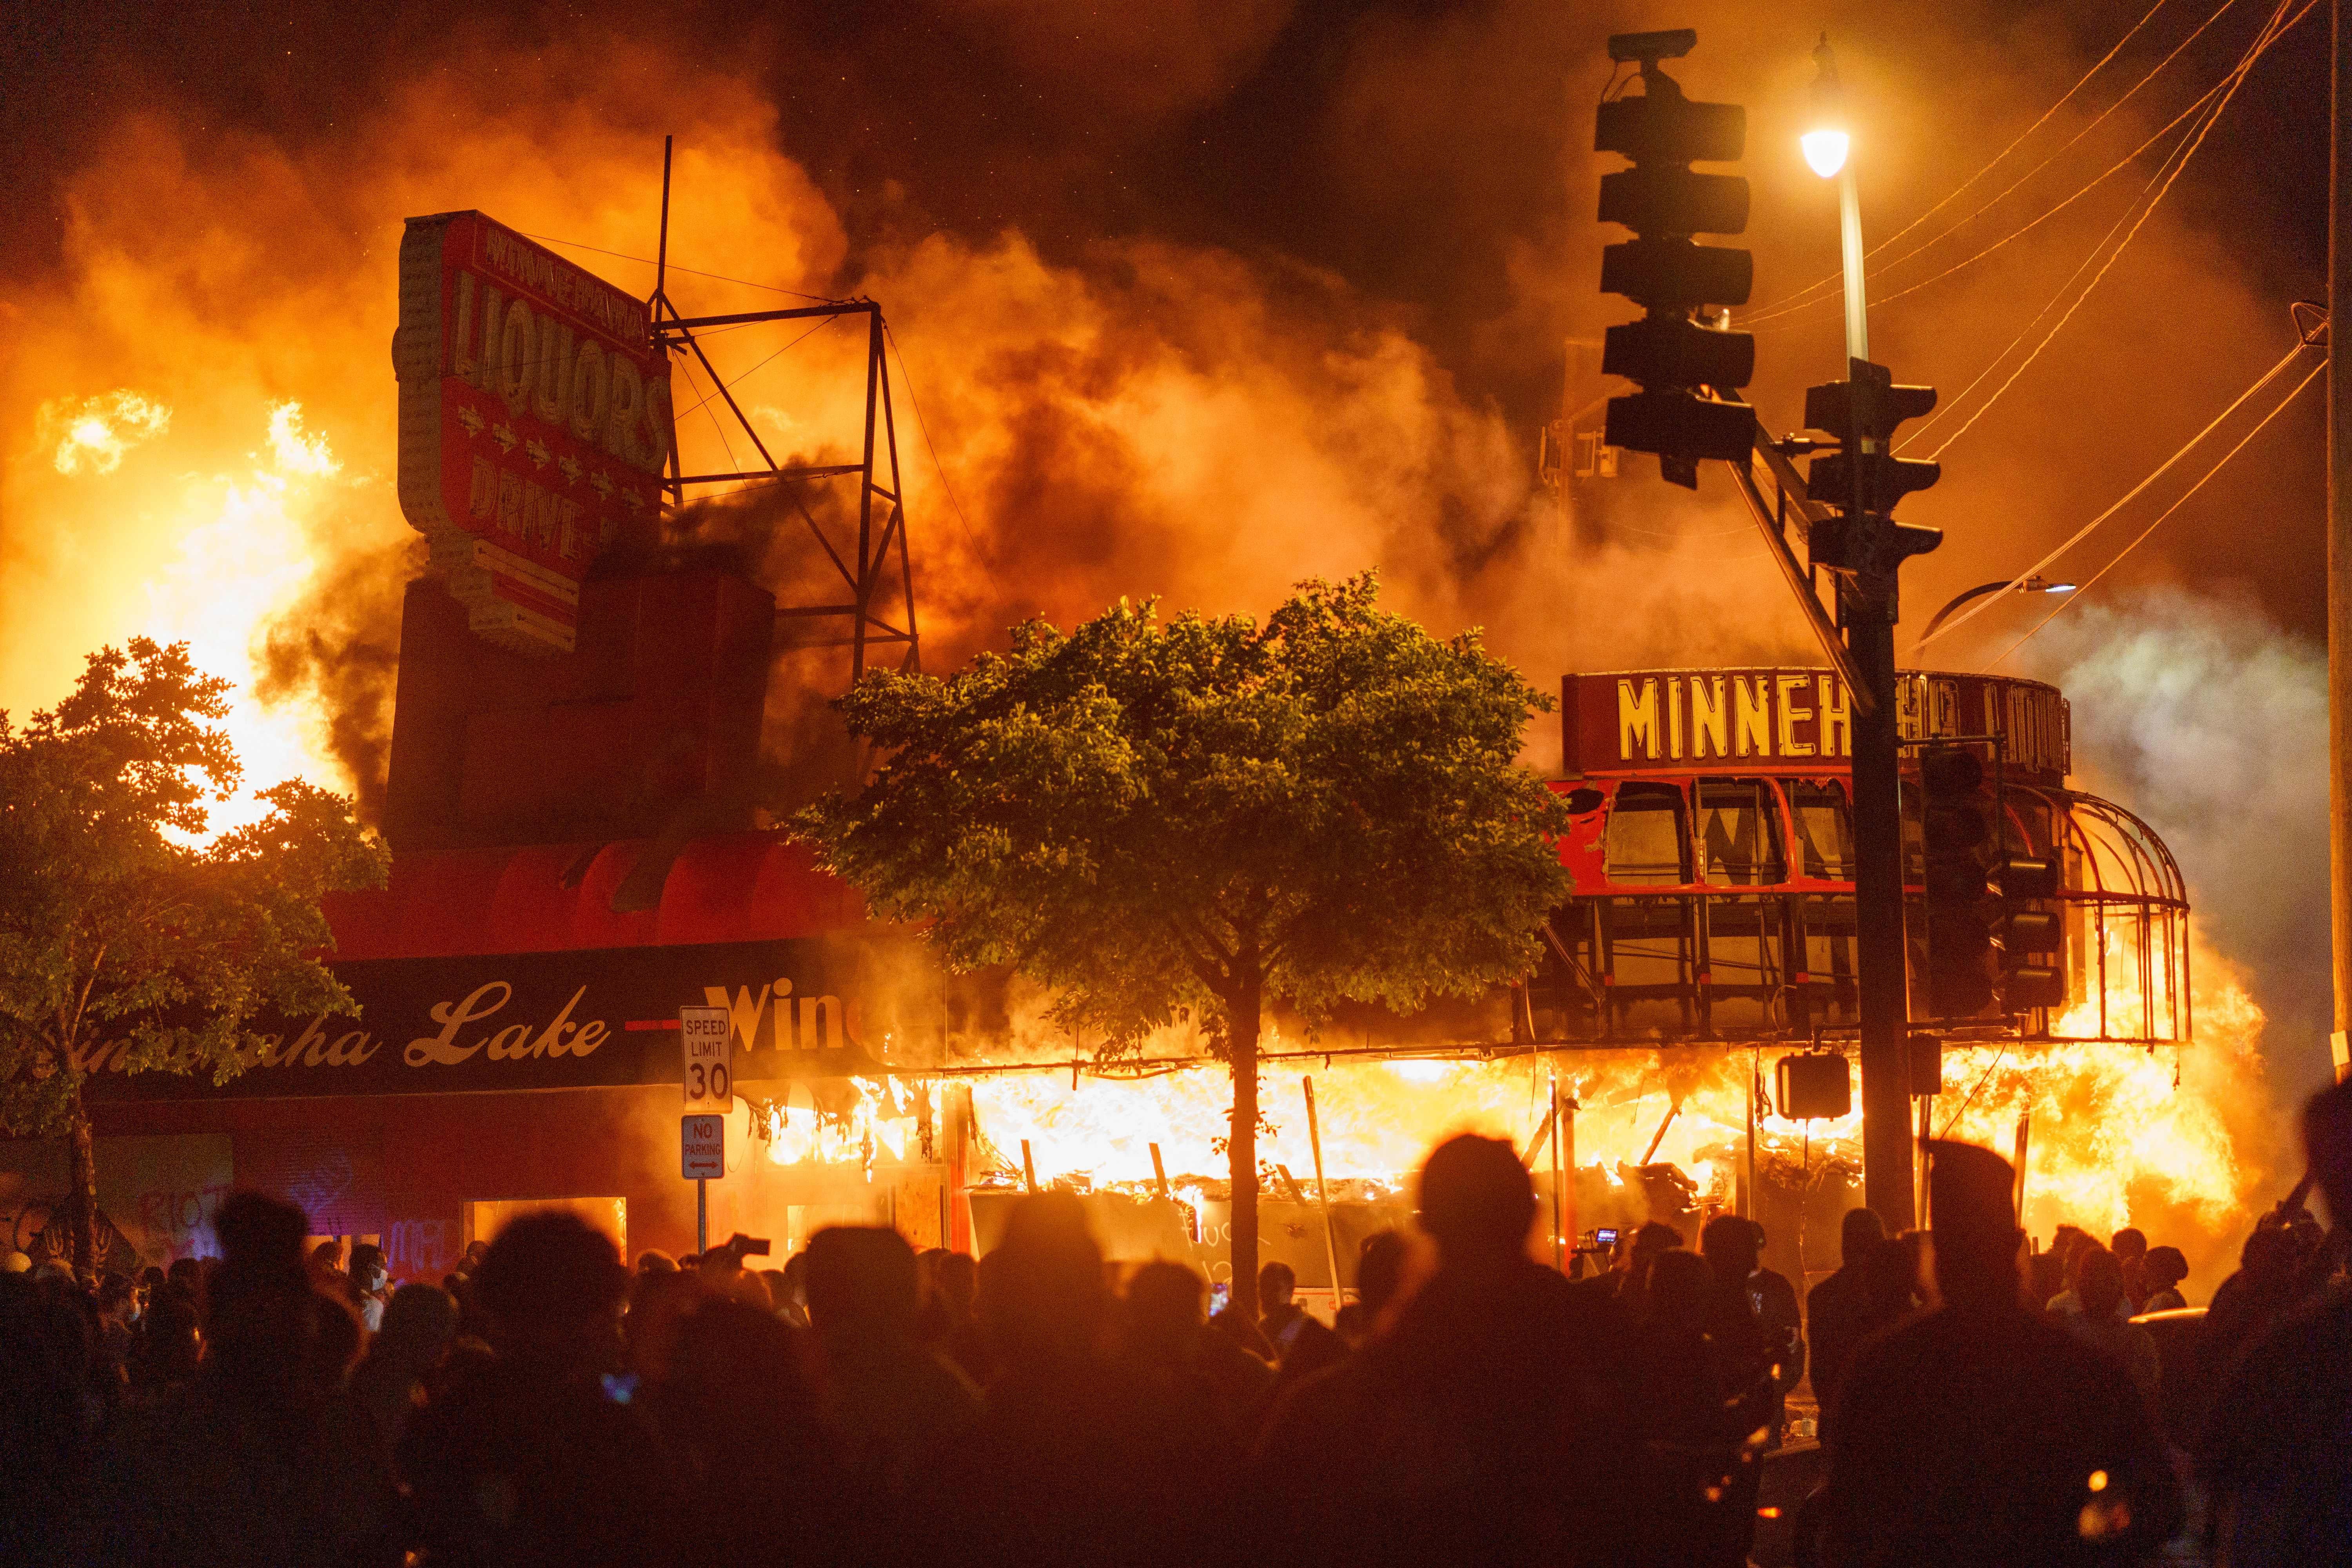 Protesters gather in the street in front of a burning liquor store. Smoke fills the night sky.